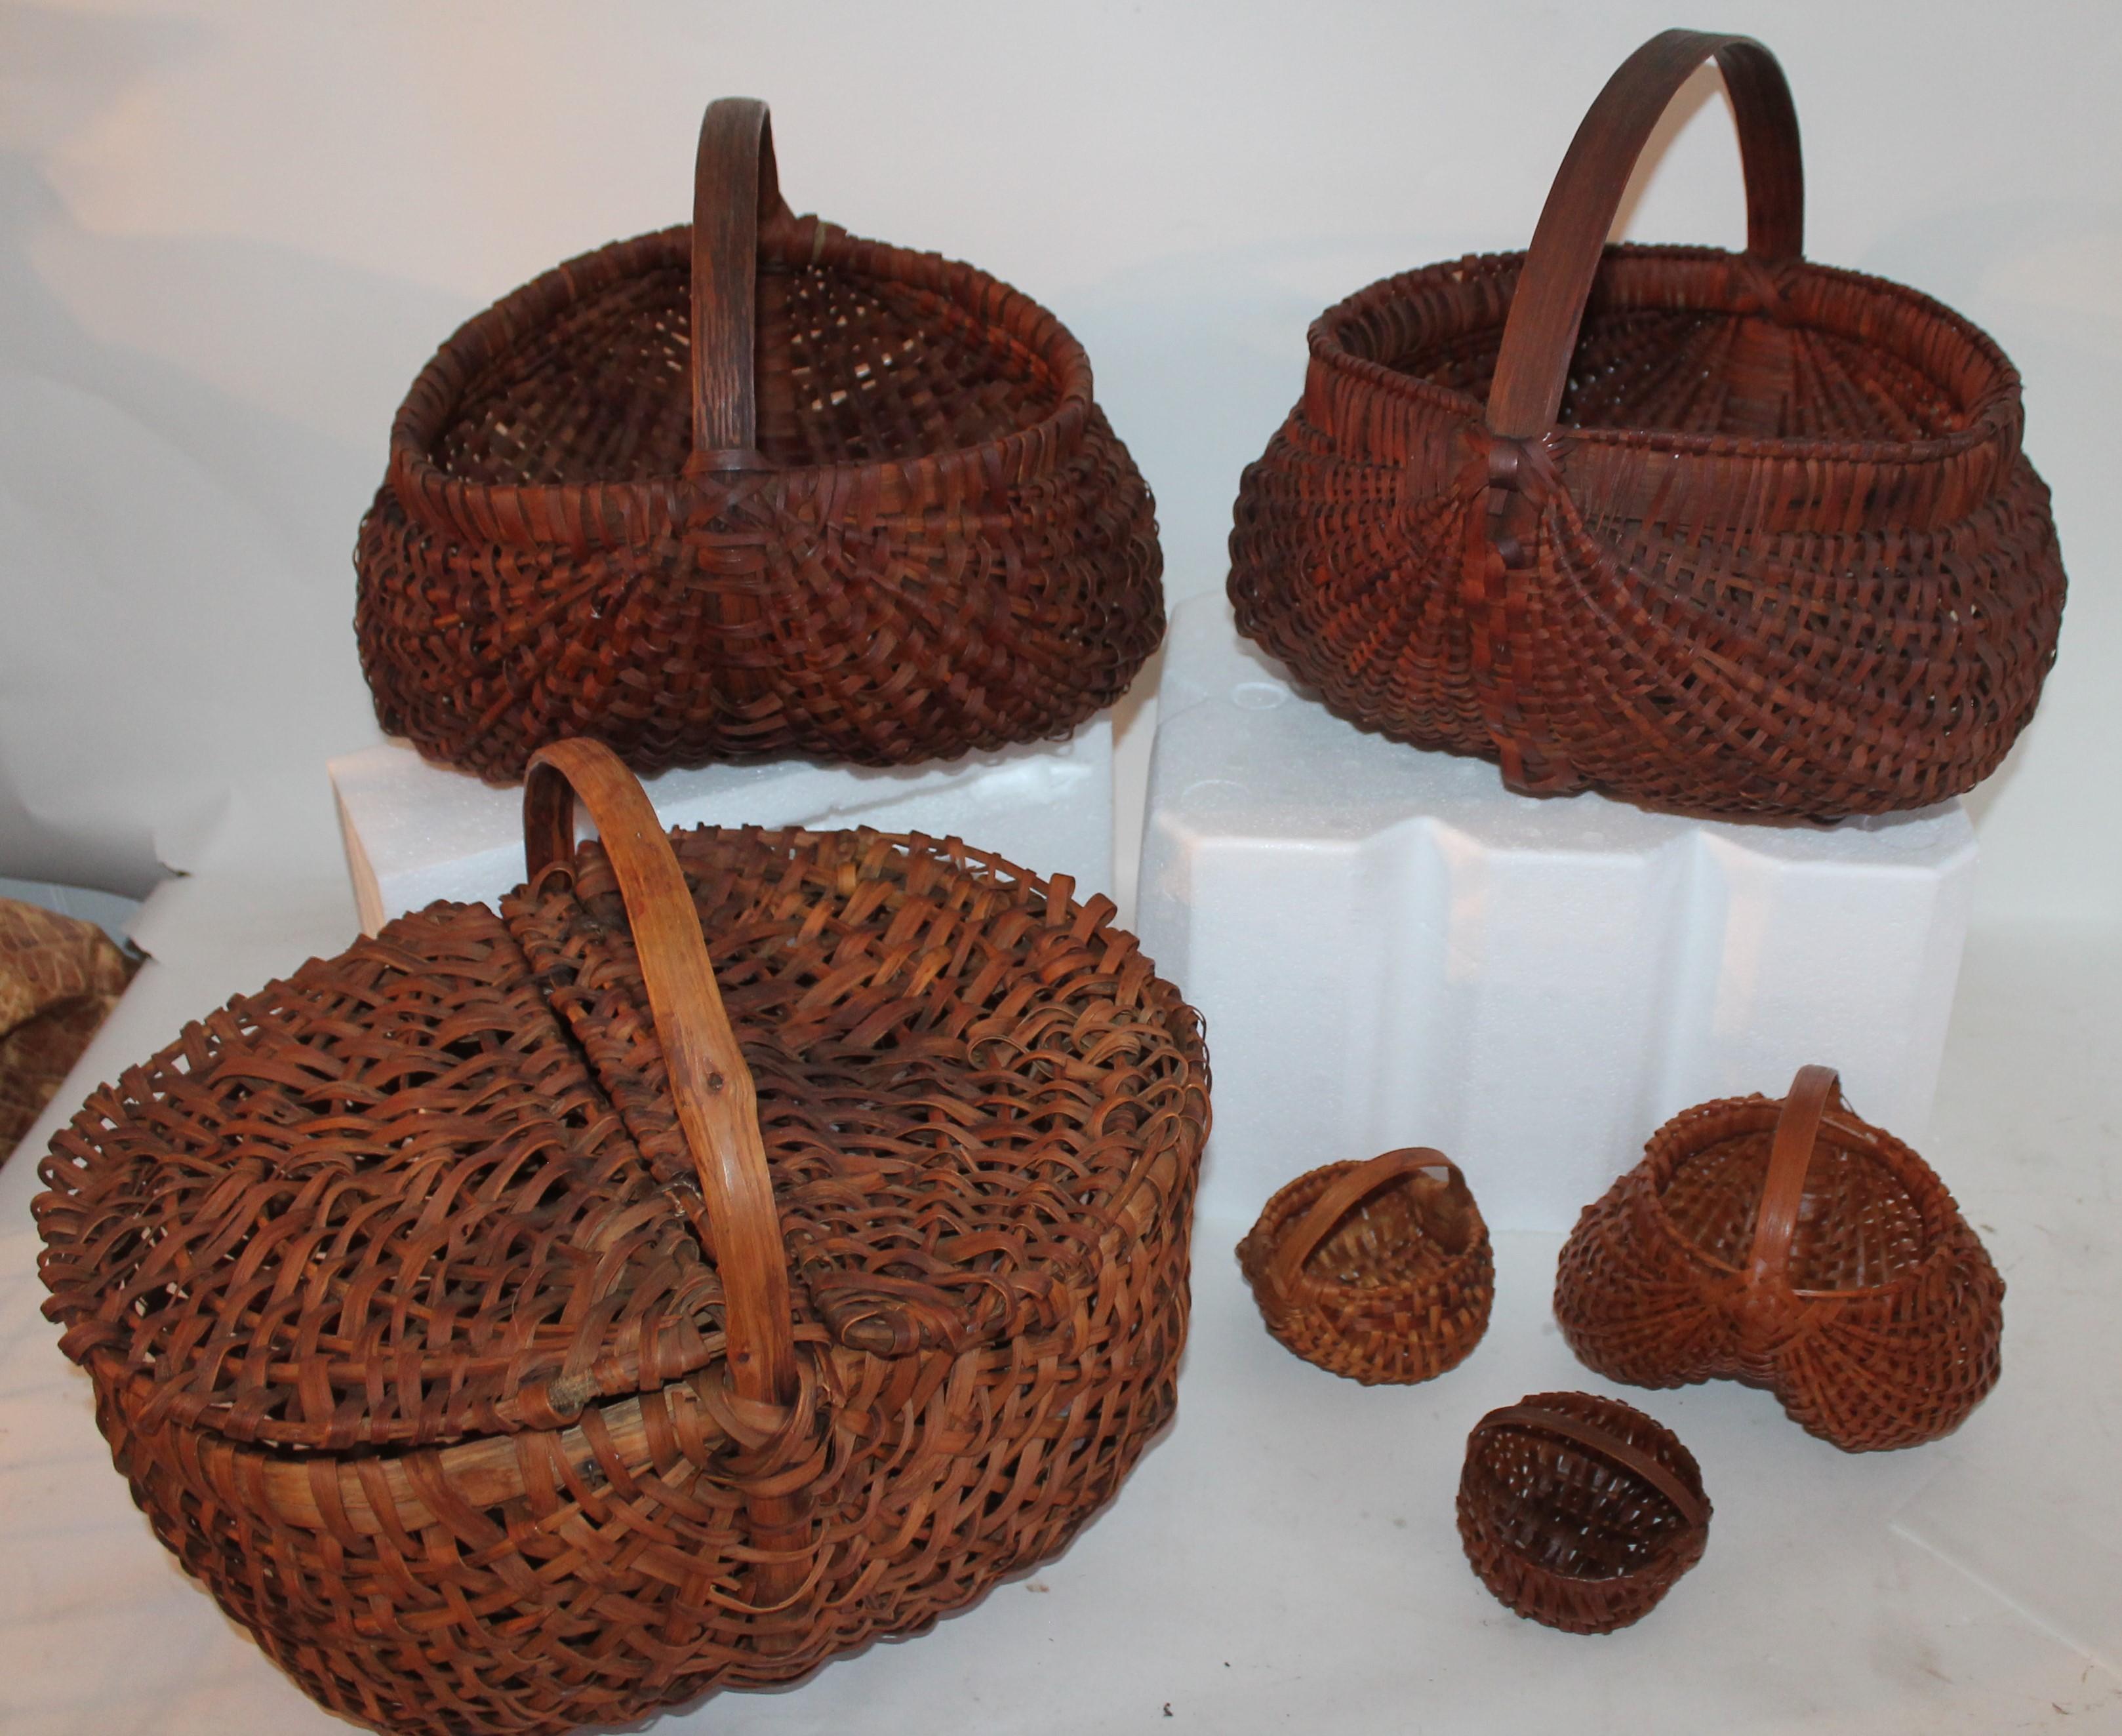 This group of finely woven hiney baskets are in really good condition. It is being sold as one group or collection. All baskets are in very good condition as found in collectors house. From tiny sizes to large sizes. The two top baskets are as